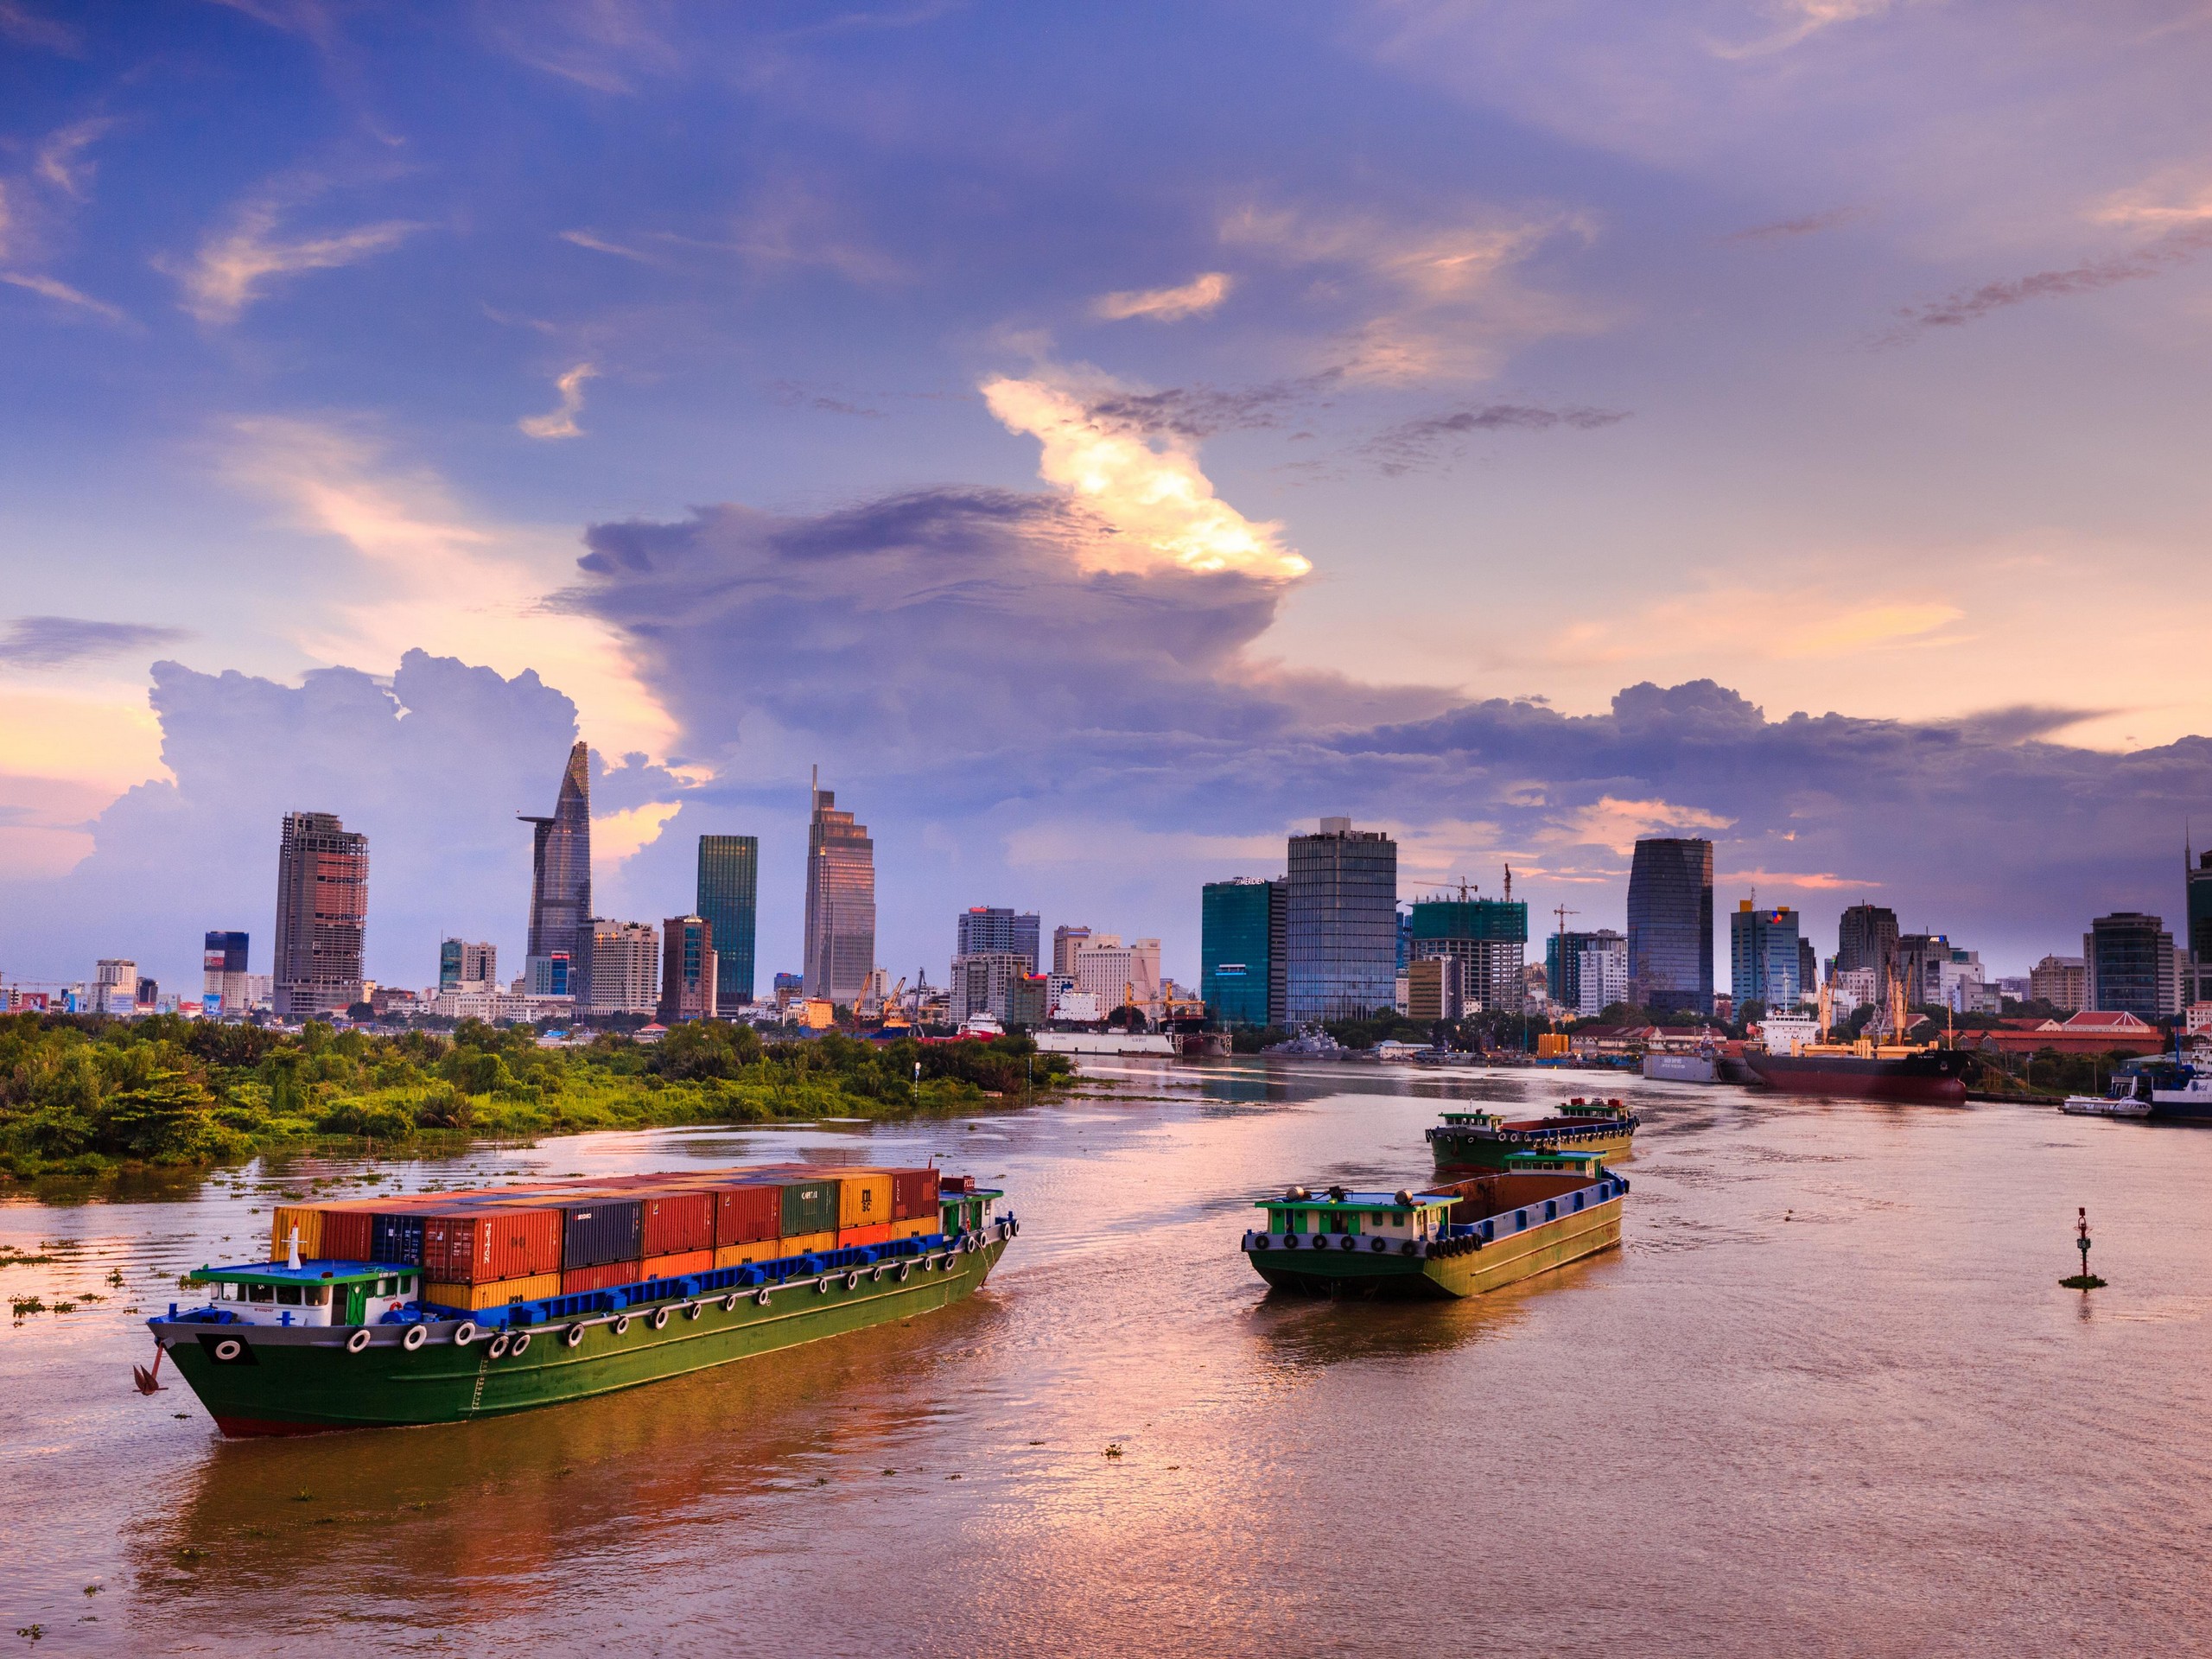 Ho Chi Minh City during the sunset